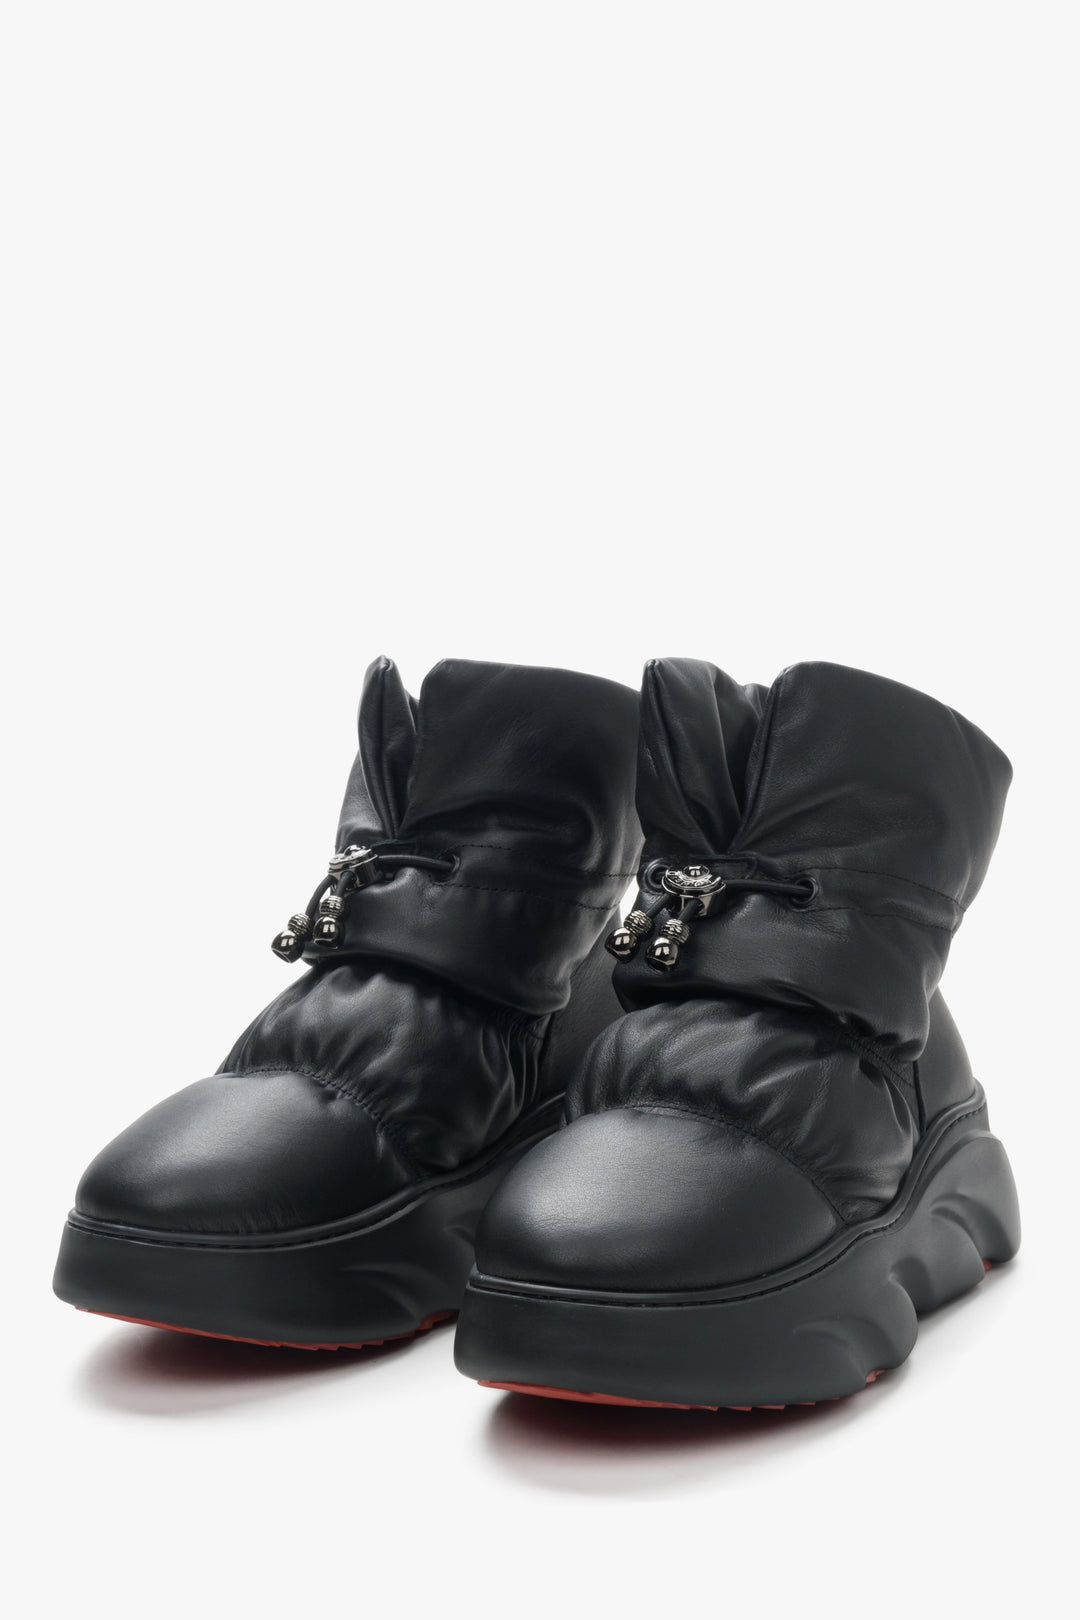 Women's black snow boots with leather and fur by Estro - front view of the shoe.